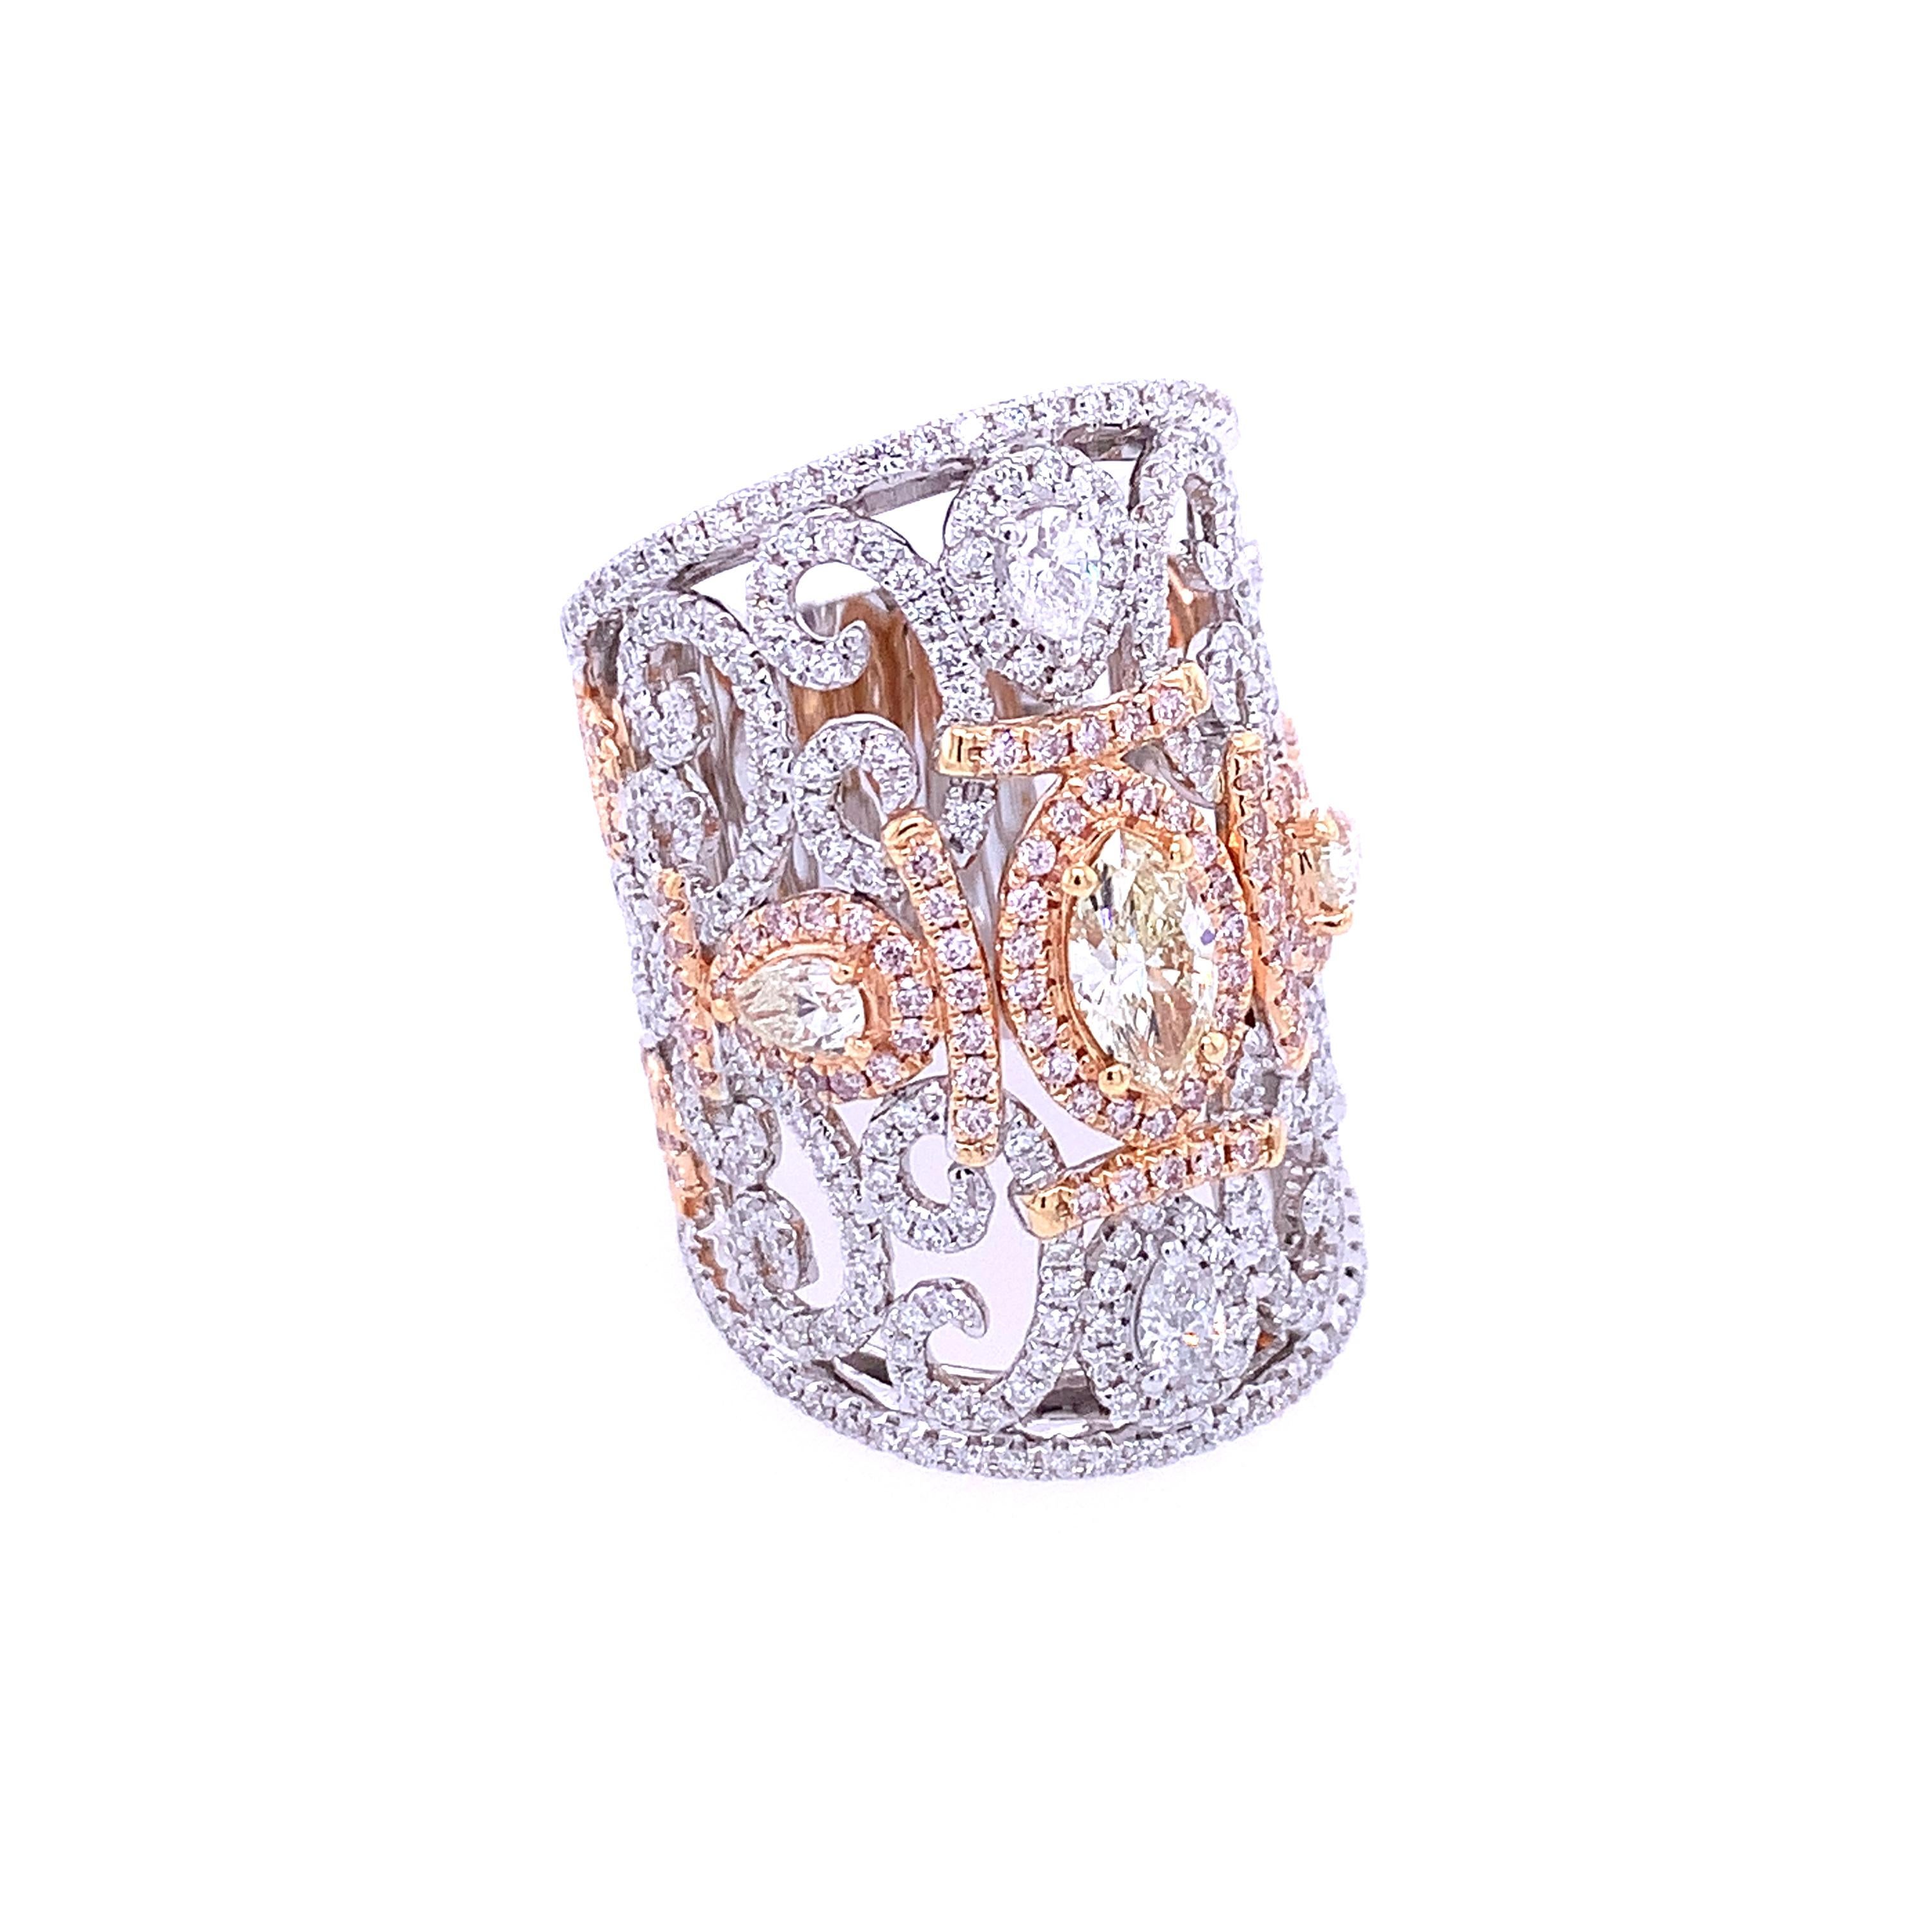 An enchanting 18K white, rose, and yellow gold contemporary ring intricately embellished with diamonds of pear shapes, marquise, and round cut. 2.12 carats of pave diamonds are nestled throughout filigree work. This classic ring highlights 0.91